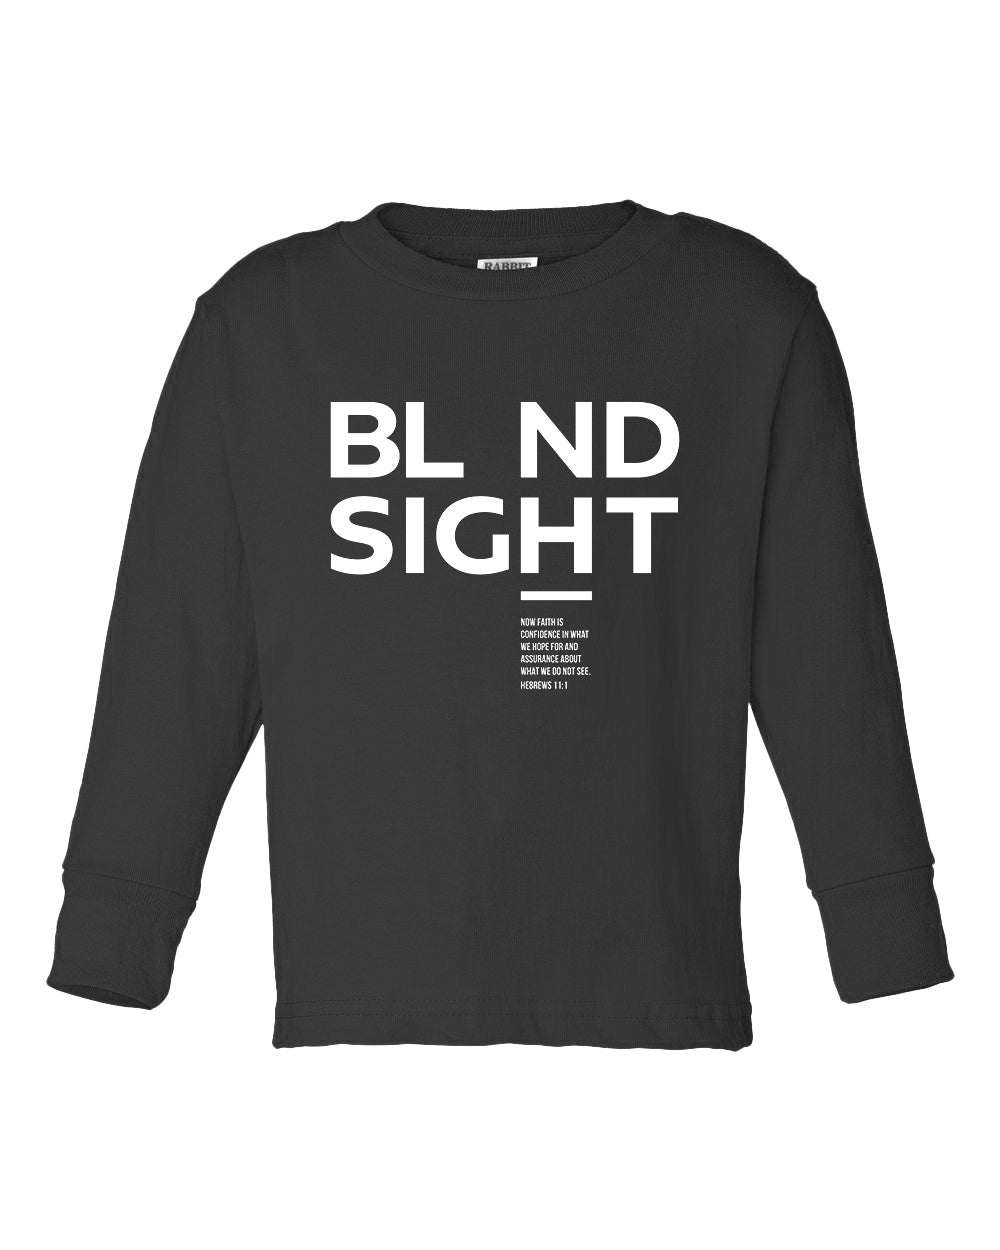 BL ND Sight 2 Toddler Long Sleeve